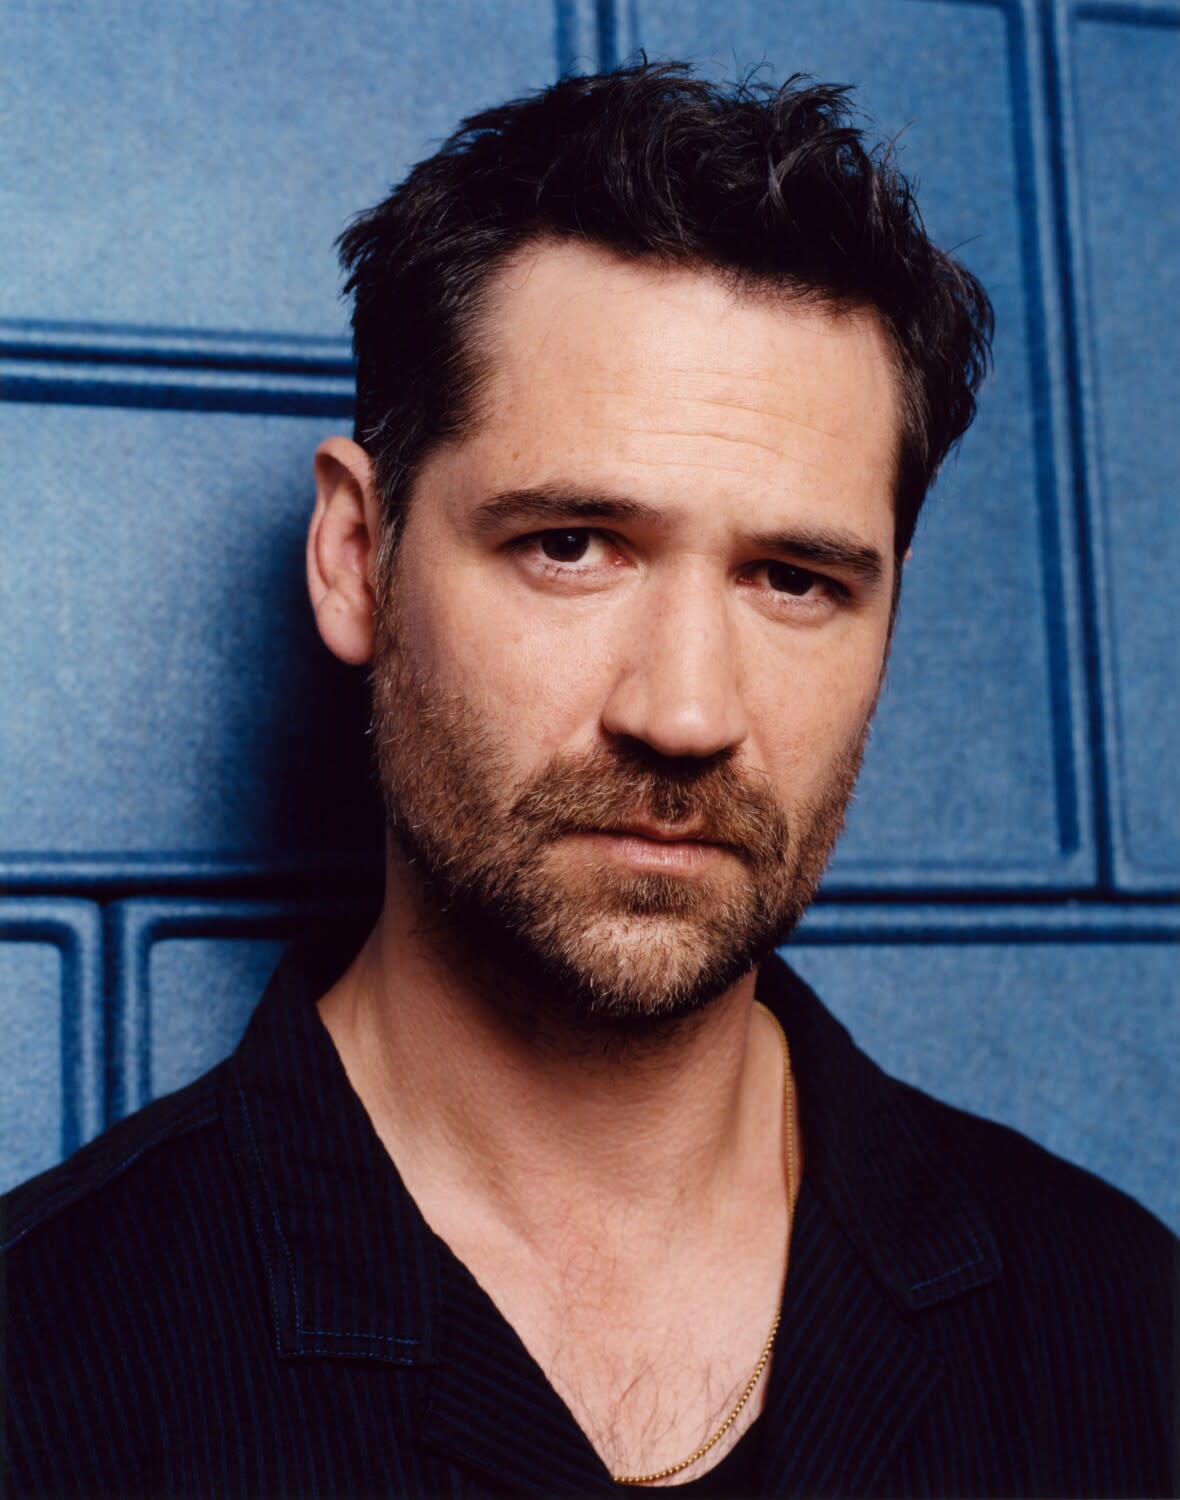 A man wearing a black shirt looks at the camera while leaning against a blue wall.